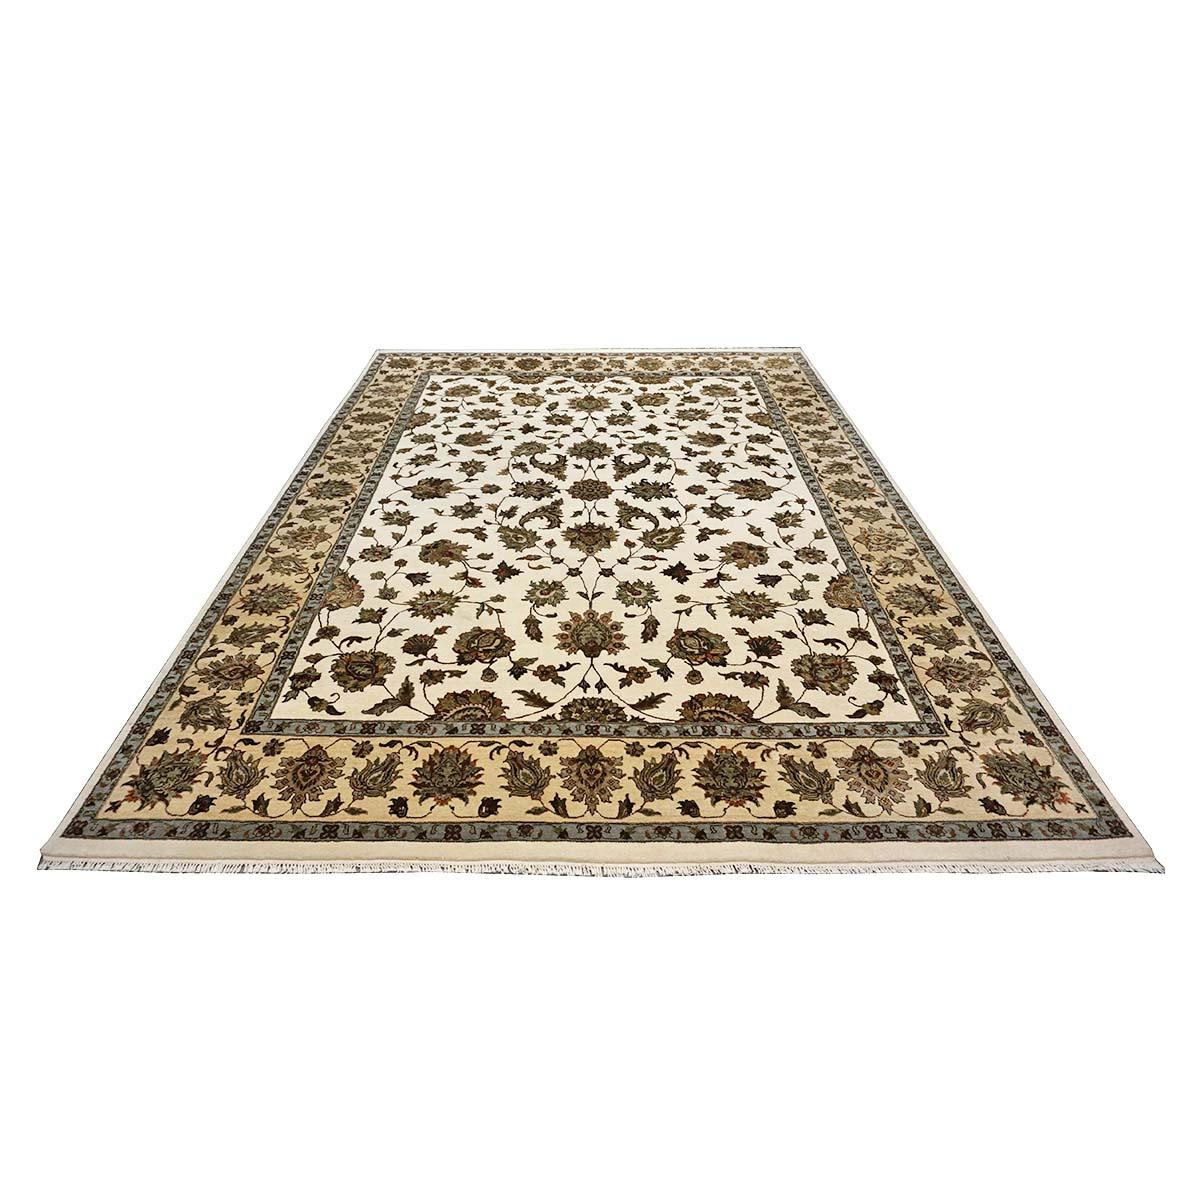  Ashly Fine Rugs presents a New Production Indian Tabriz 9x12 Wool & Silk Handmade Rug. Tabriz is a northern city in modern-day Iran and has forever been famous for the fineness and craftsmanship of its handmade rugs. Over the years, many countries